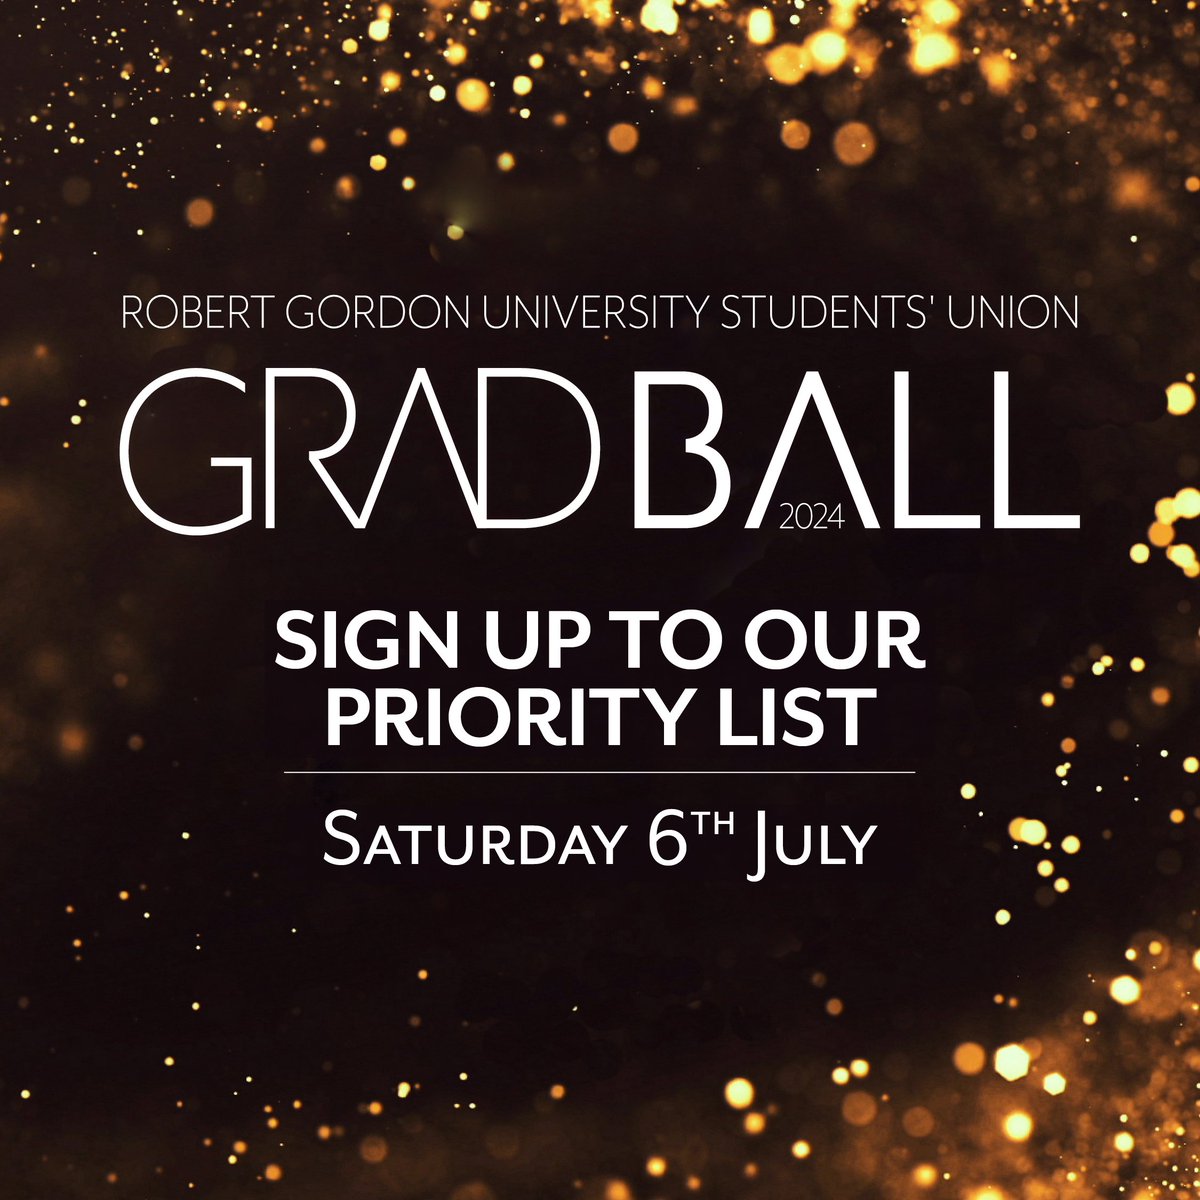 𝐒𝐀𝐕𝐄 𝐓𝐇𝐄 𝐃𝐀𝐓𝐄 𝐅𝐎𝐑 𝐆𝐑𝐀𝐃 𝐁𝐀𝐋𝐋! 🎓✨ Grab your dancing shoes, your best outfit and get ready for a night to remember 💃🕺 (yes, that is a High School Musical reference 👀) Find out more & sign up to our priority list here ➡️ rguunion.native.fm/event/grad-bal…